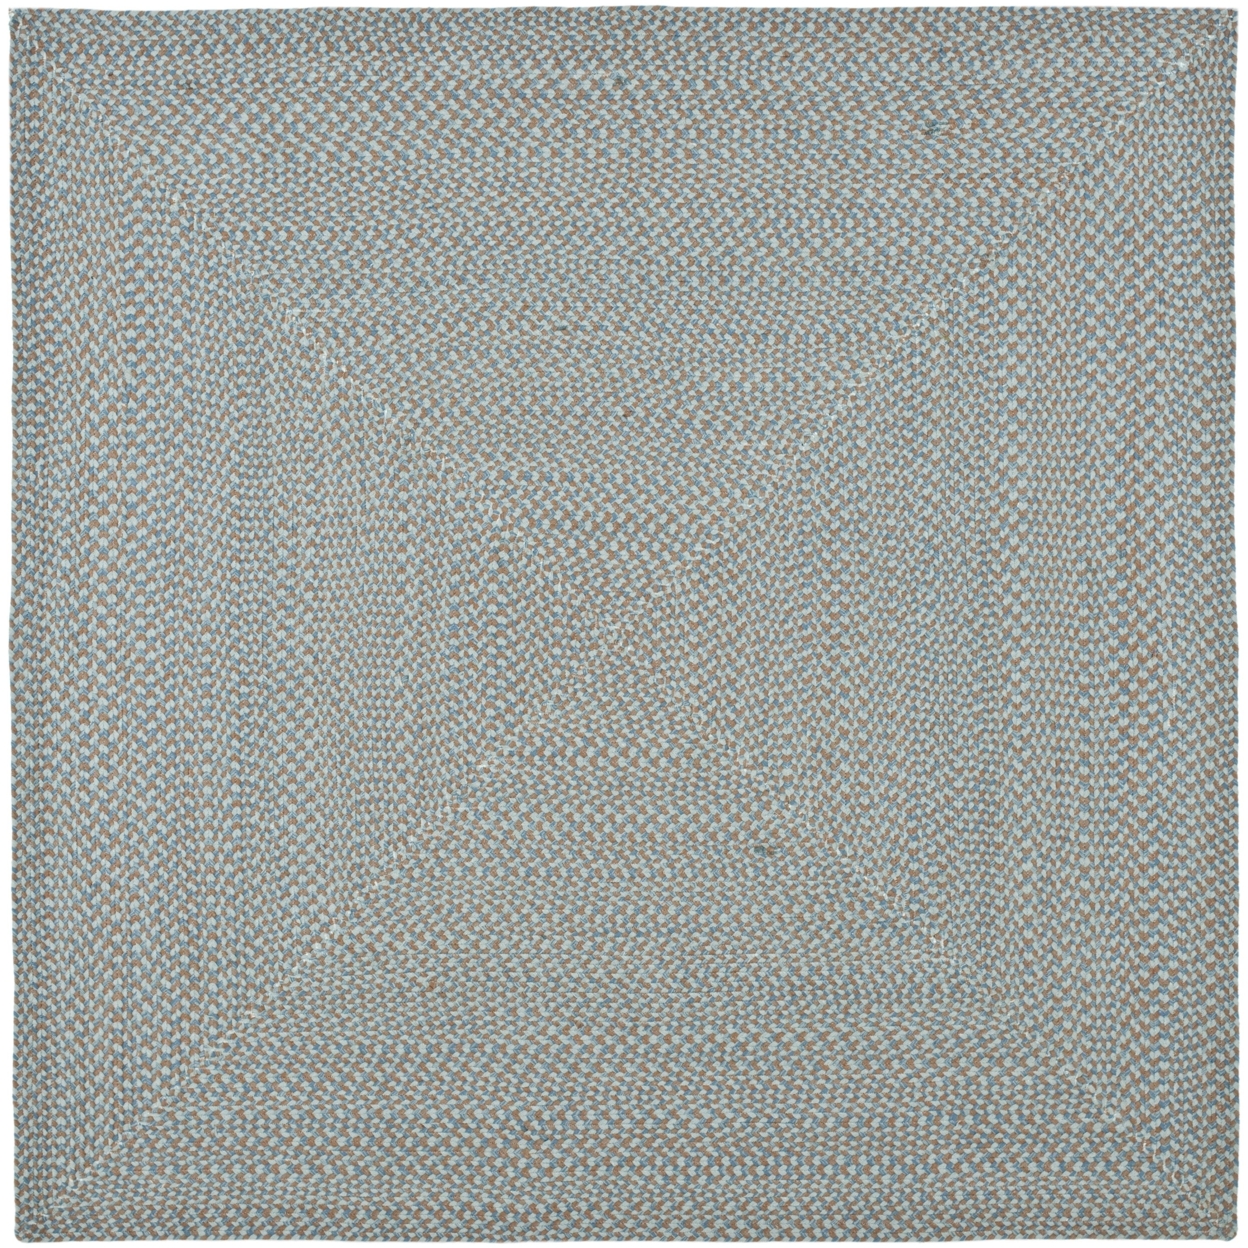 SAFAVIEH Braided Collection BRD170A Handwoven Multi Rug - 8' Square